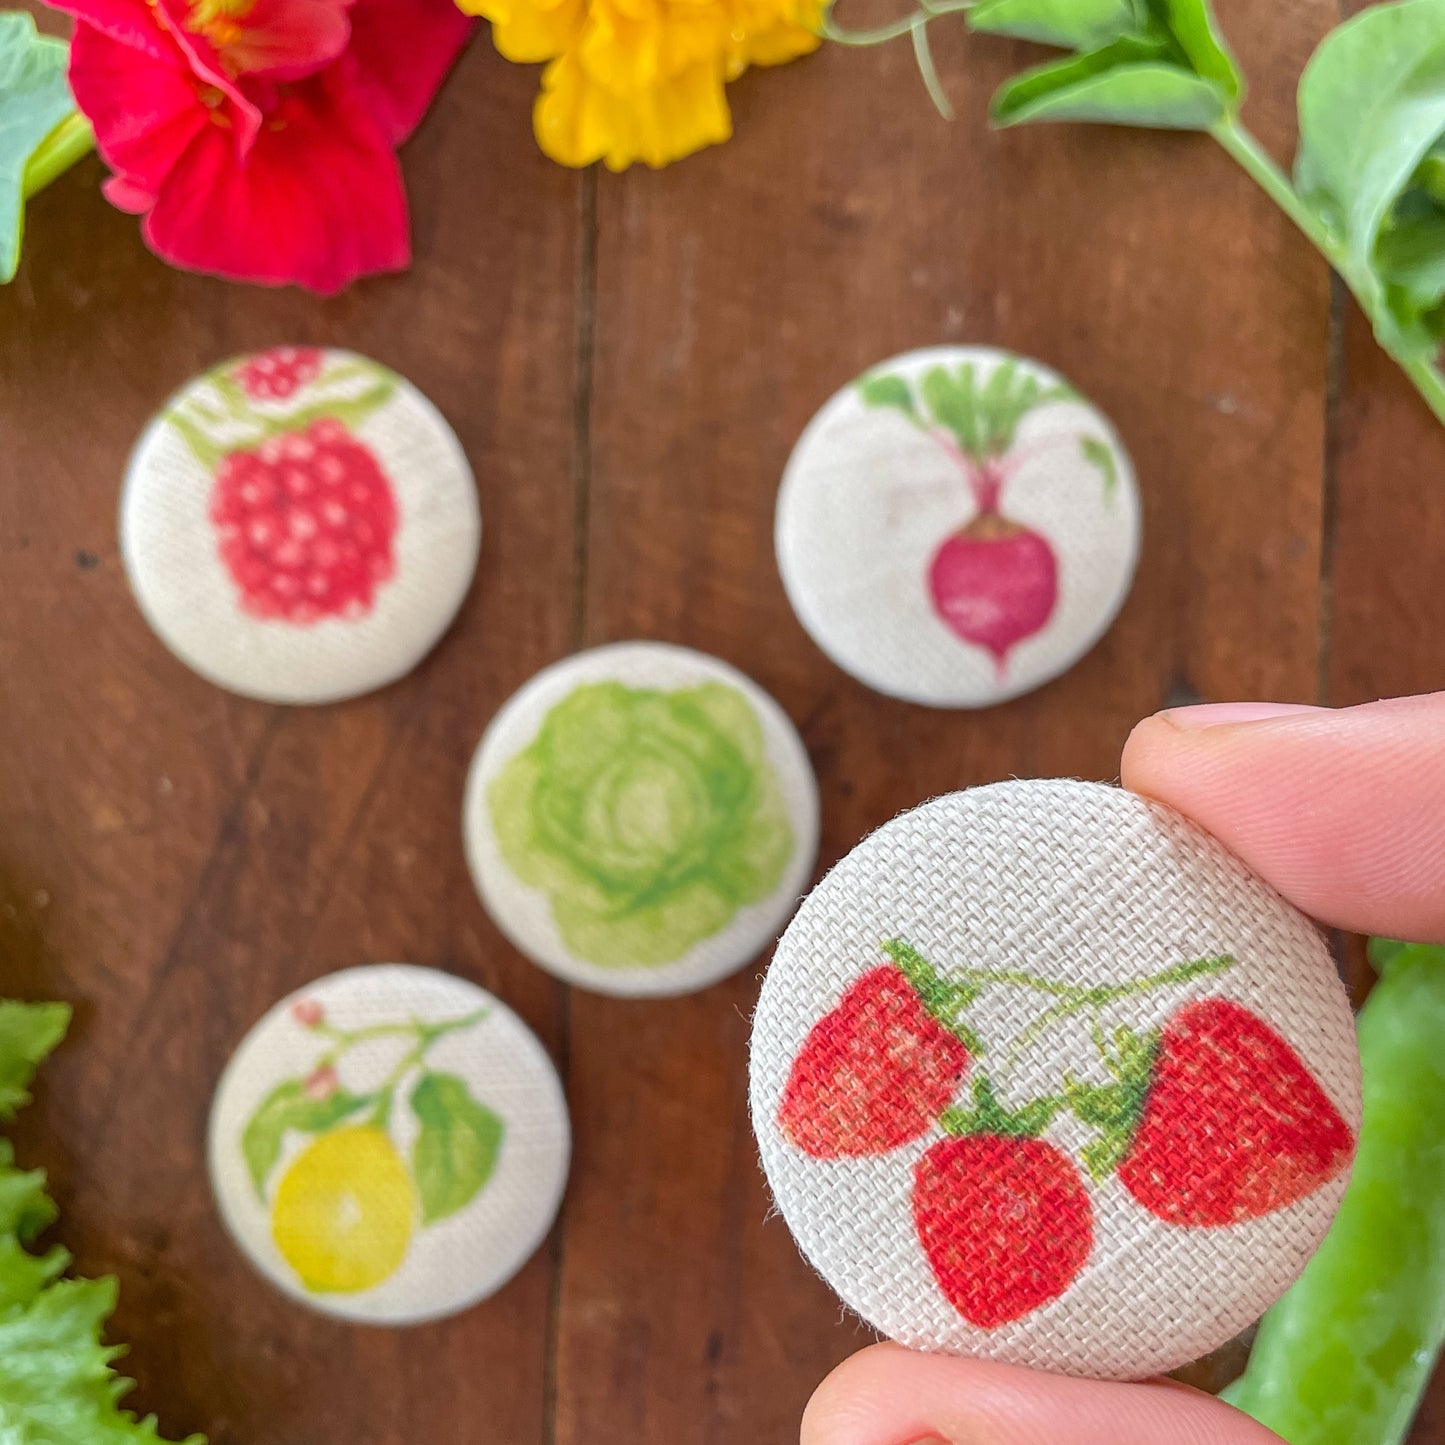 Gardener's Collection Vegetable Fabric Button Magnet Set